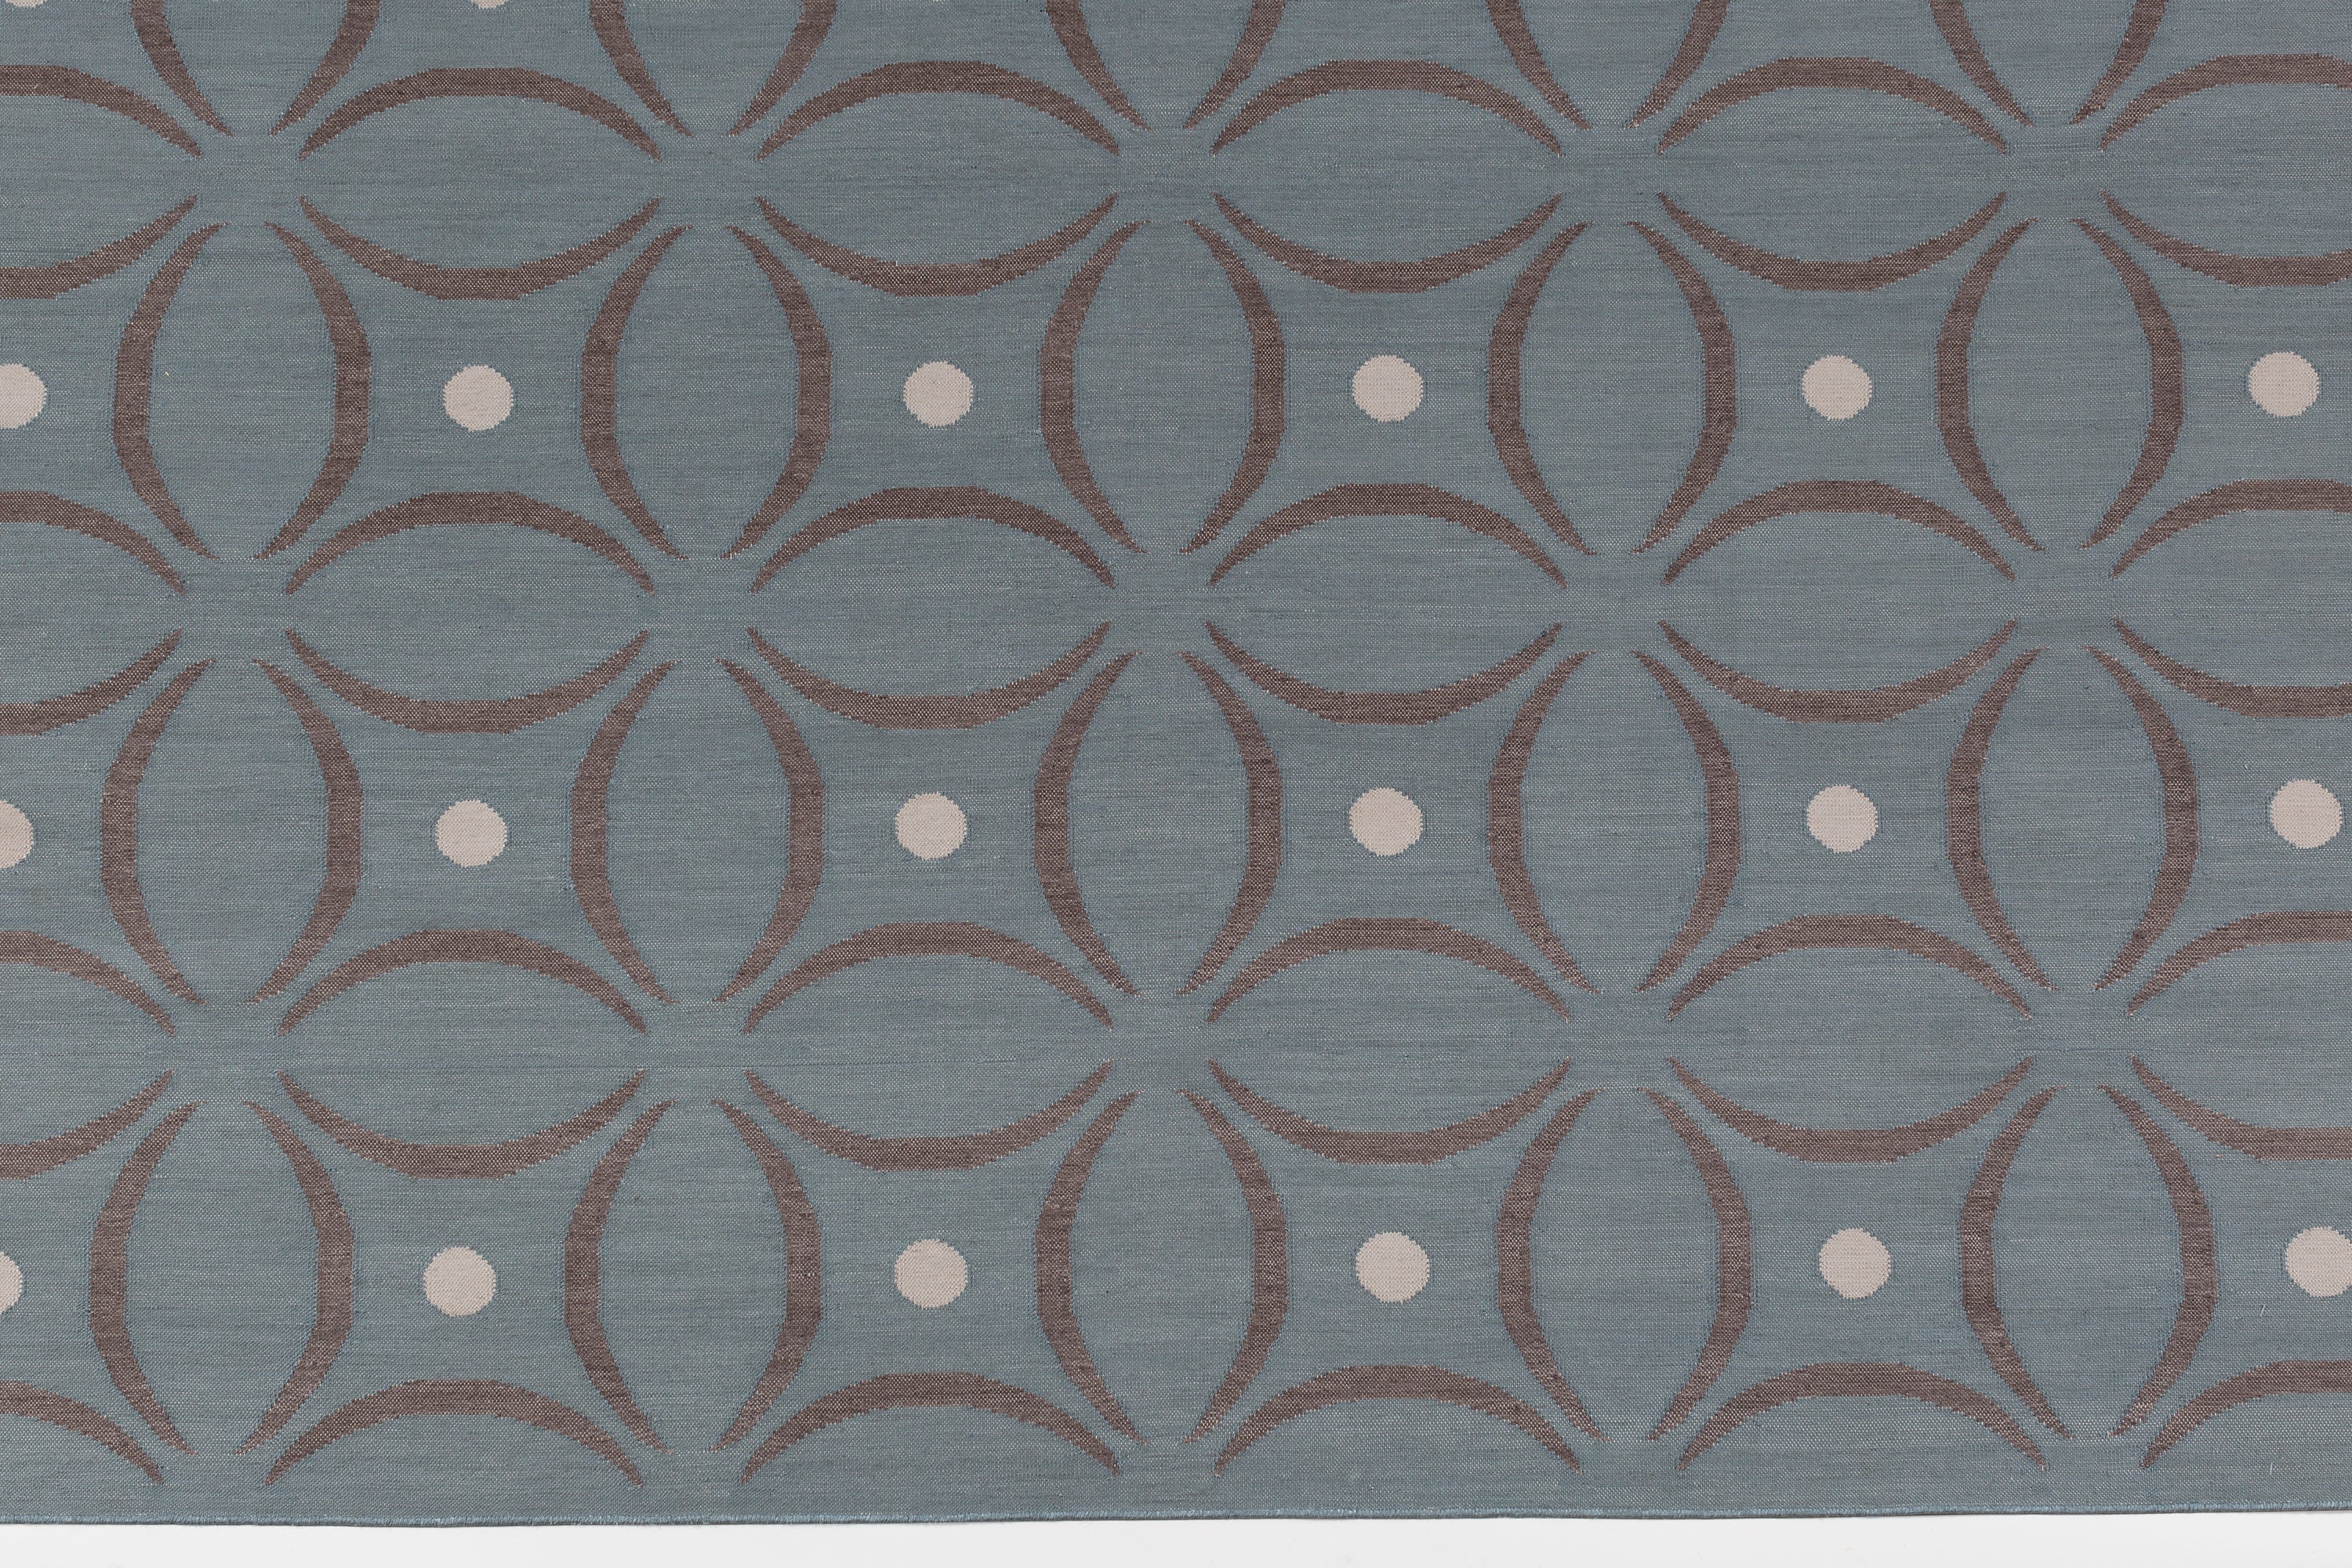 Detail of the Boe rug in Argento, featuring a pattern of curved segments in grey with white circles on a blue field. 